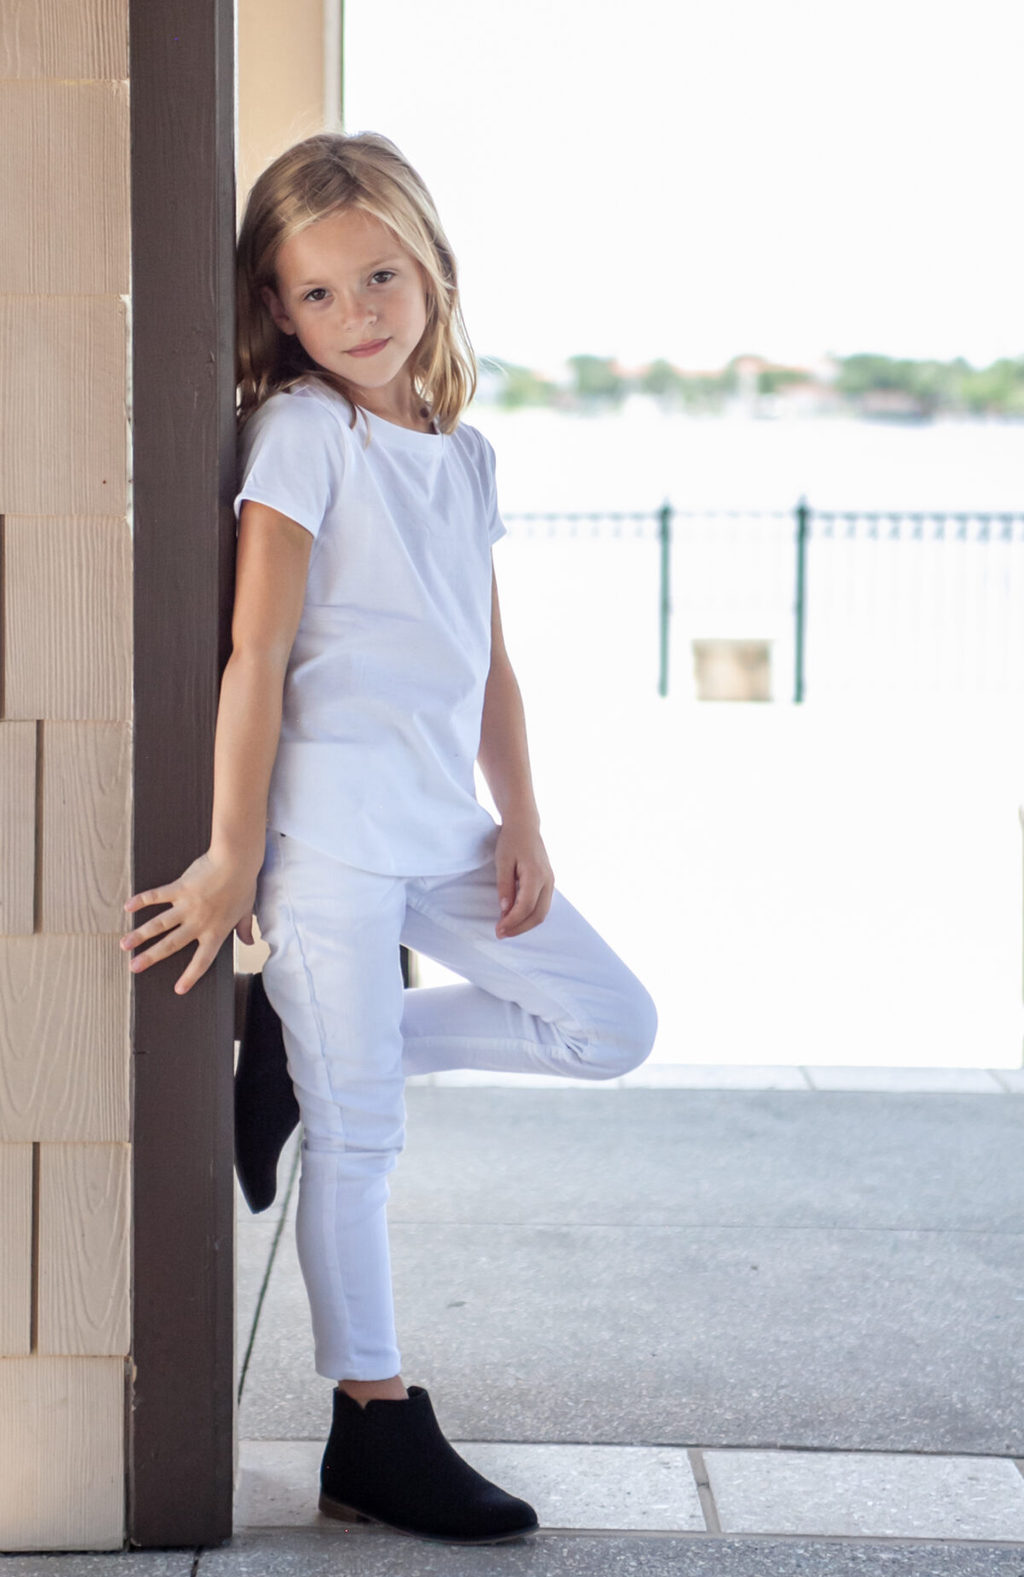 21 Fashionable & Fun-Loving Fall Clothes For Kids